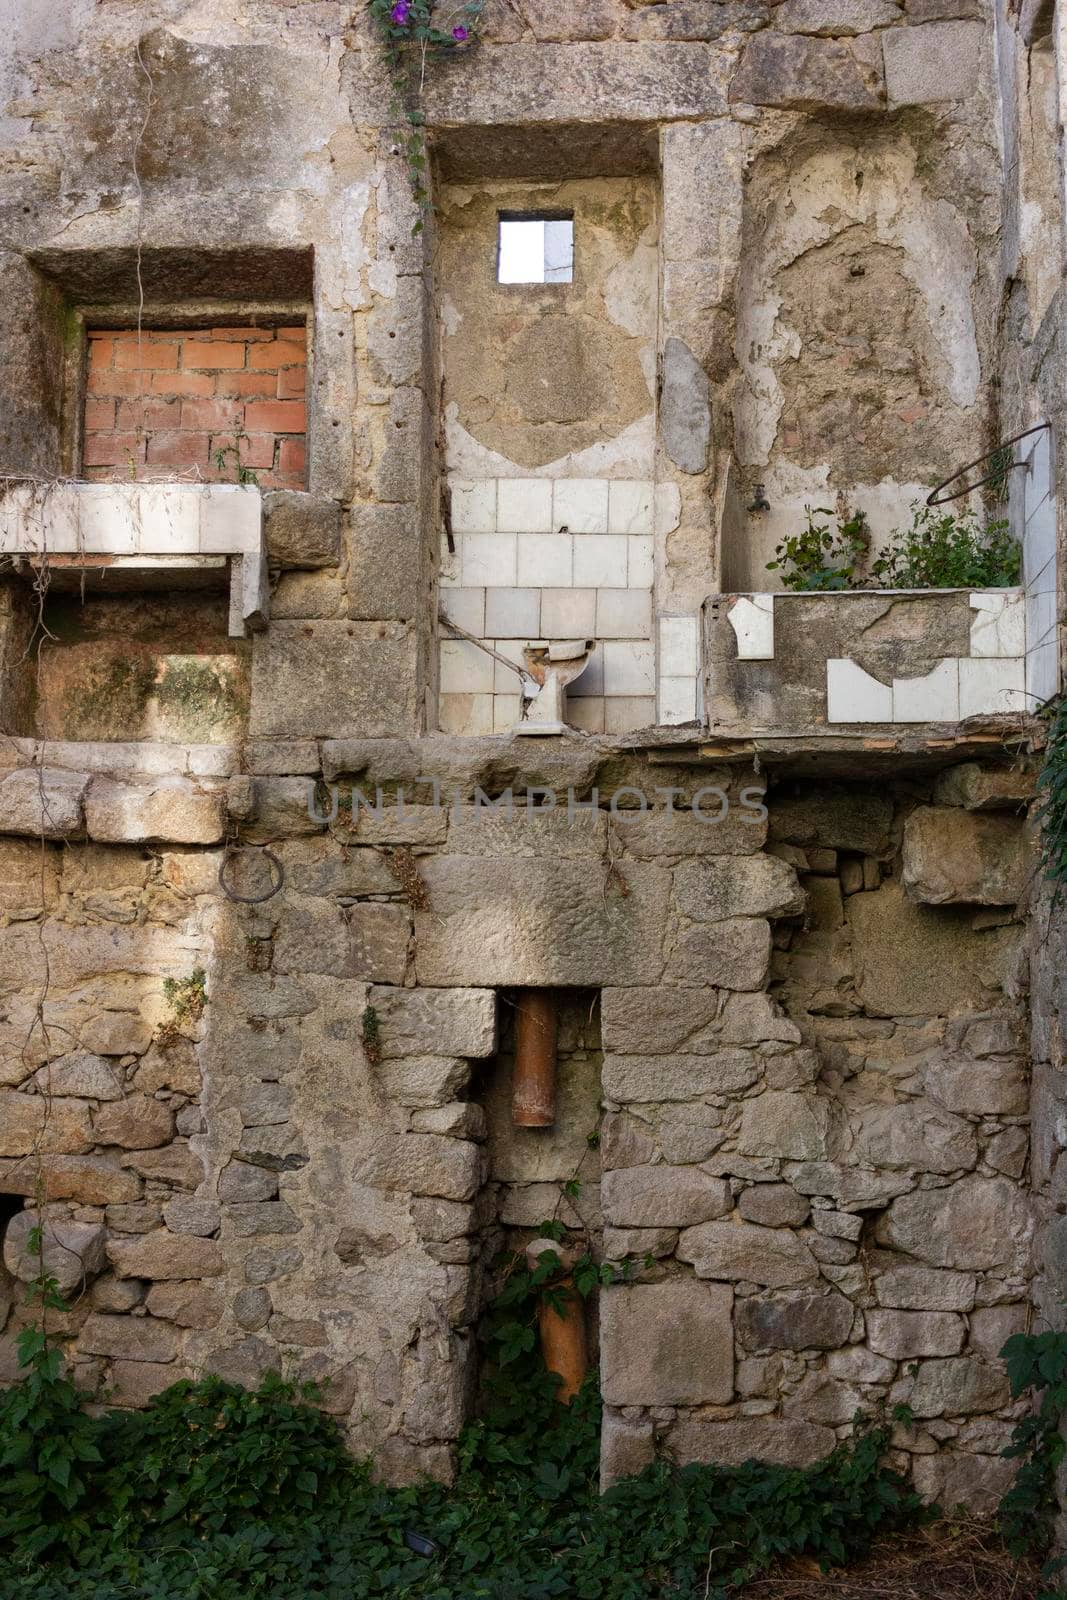 Dilapidated stone house, with exposed toilet